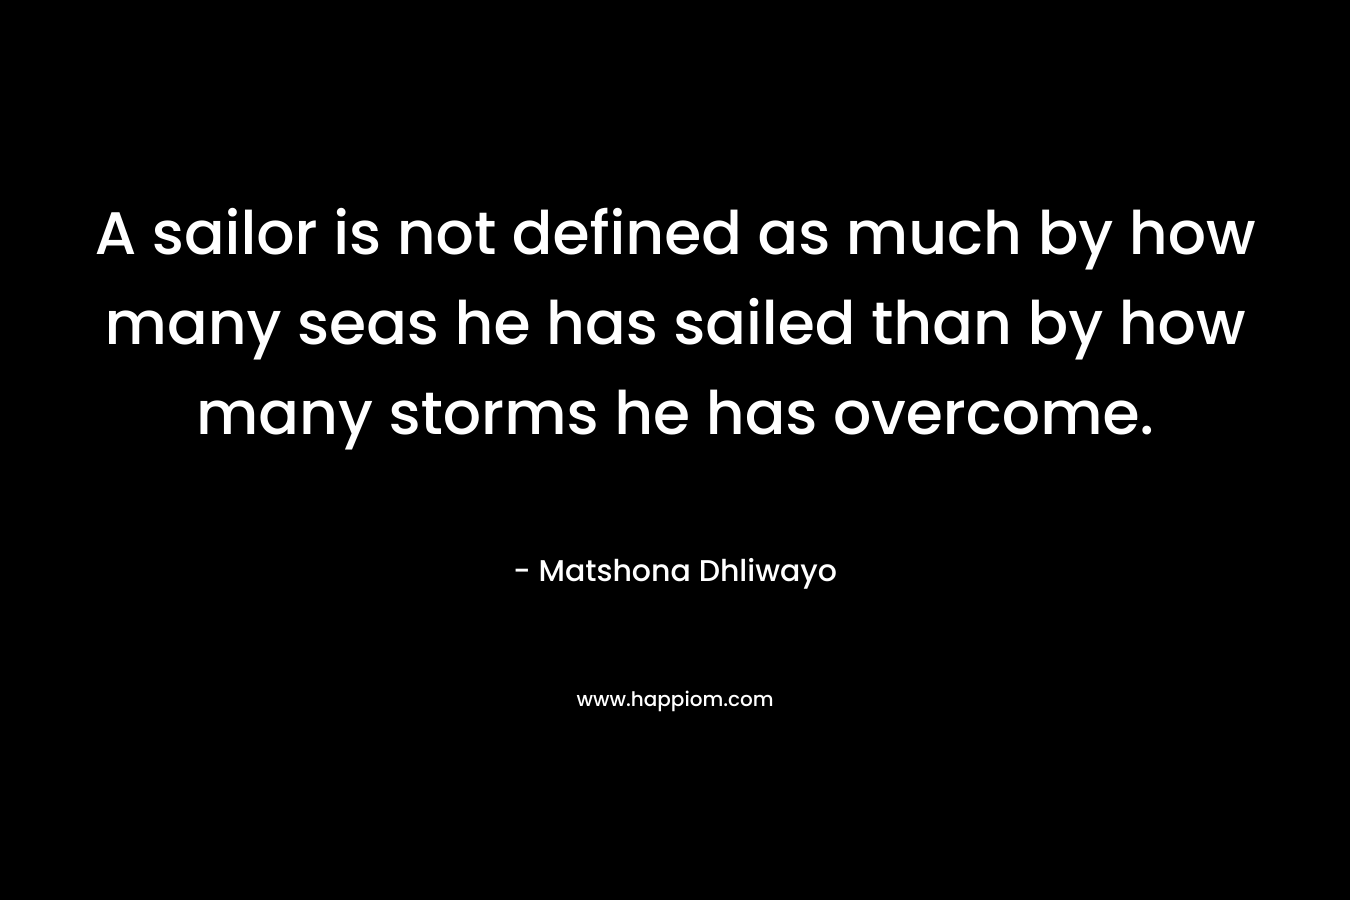 A sailor is not defined as much by how many seas he has sailed than by how many storms he has overcome. – Matshona Dhliwayo